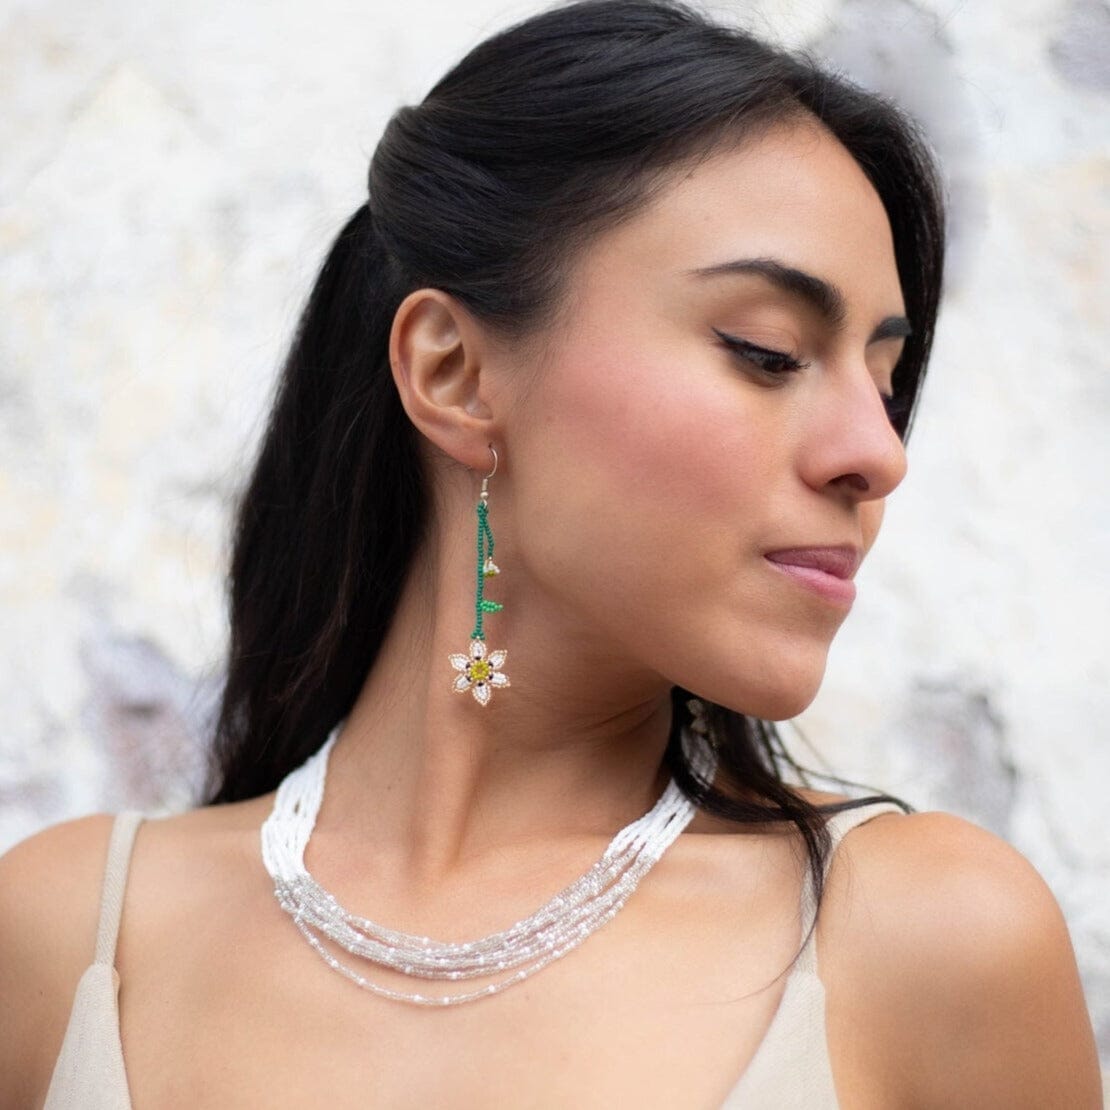 Creative Ways to Fashion with Authentic Jewelry